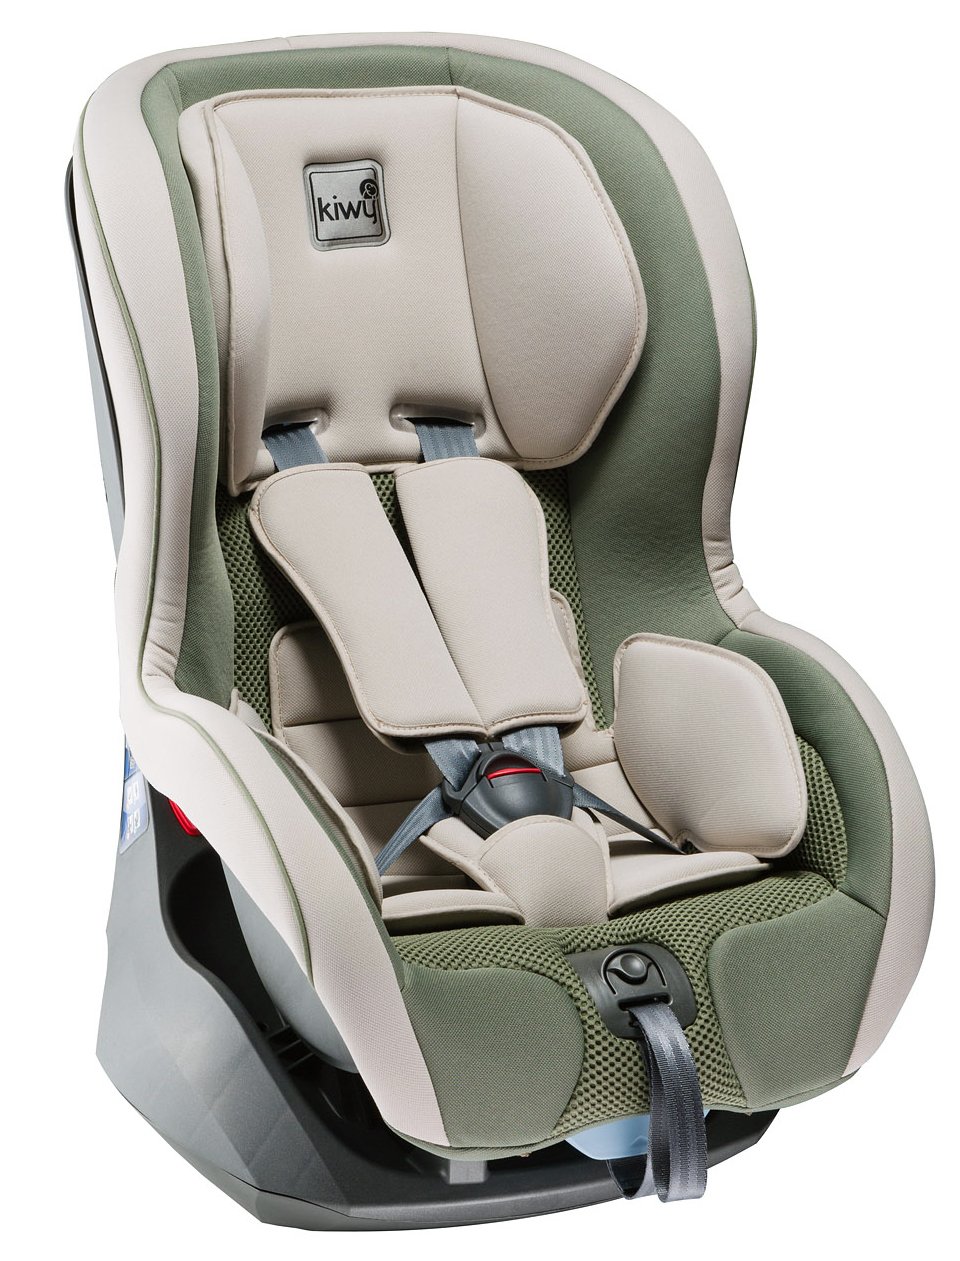 Kiwy Group 1 Car Seat 9 – 18 kg, SP1 Universal 1, Shock-Absorber-And-Automatic-Tensioning-System Energy Management